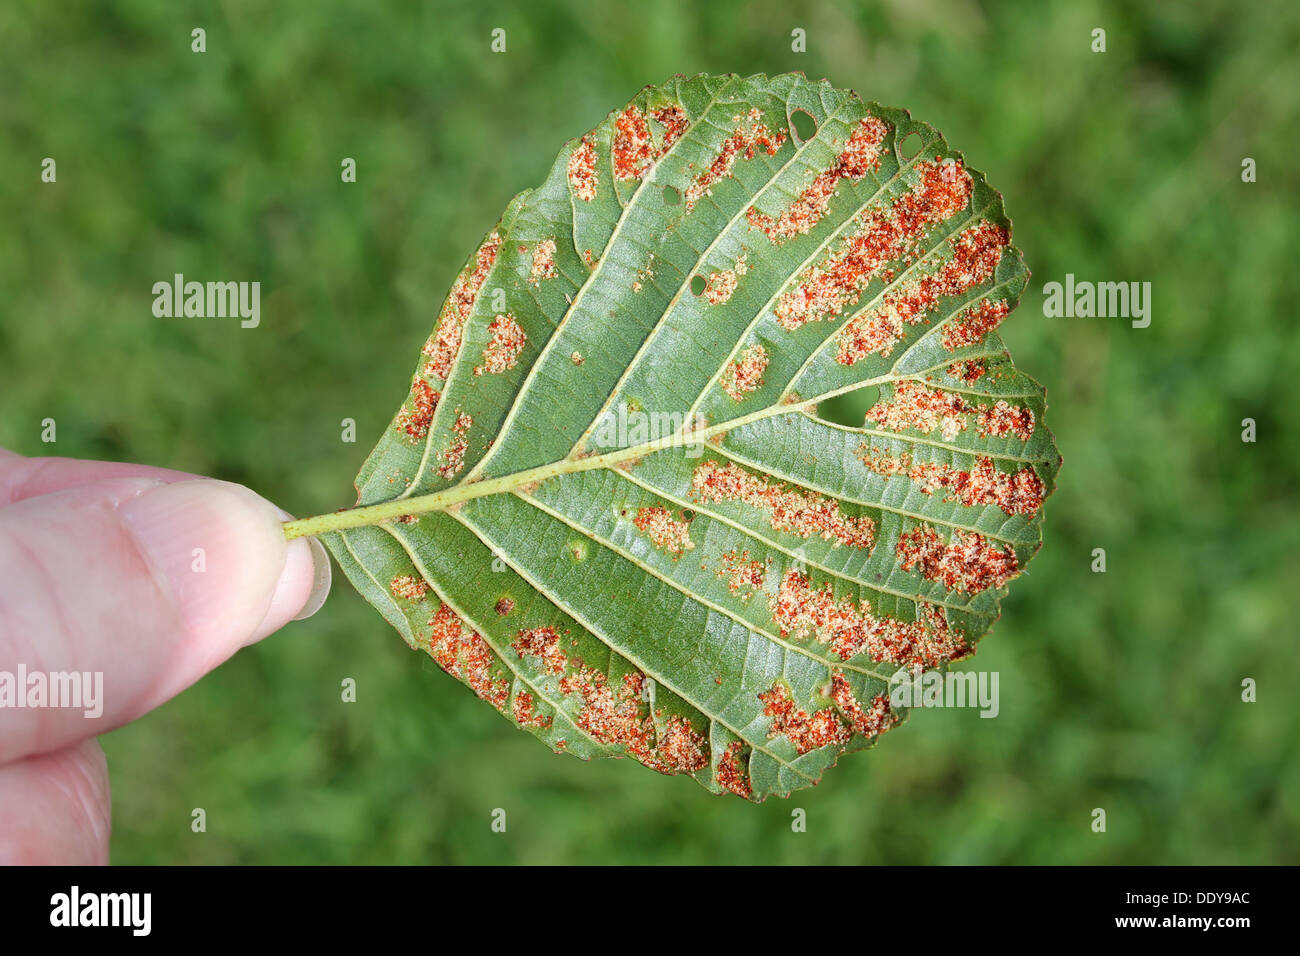 Mature Galls on Alder Alnus glutinosa leaves caused by the Gall Mite Acalitus brevitarsus a.k.a. Eriophyes brevitarsus Stock Photo